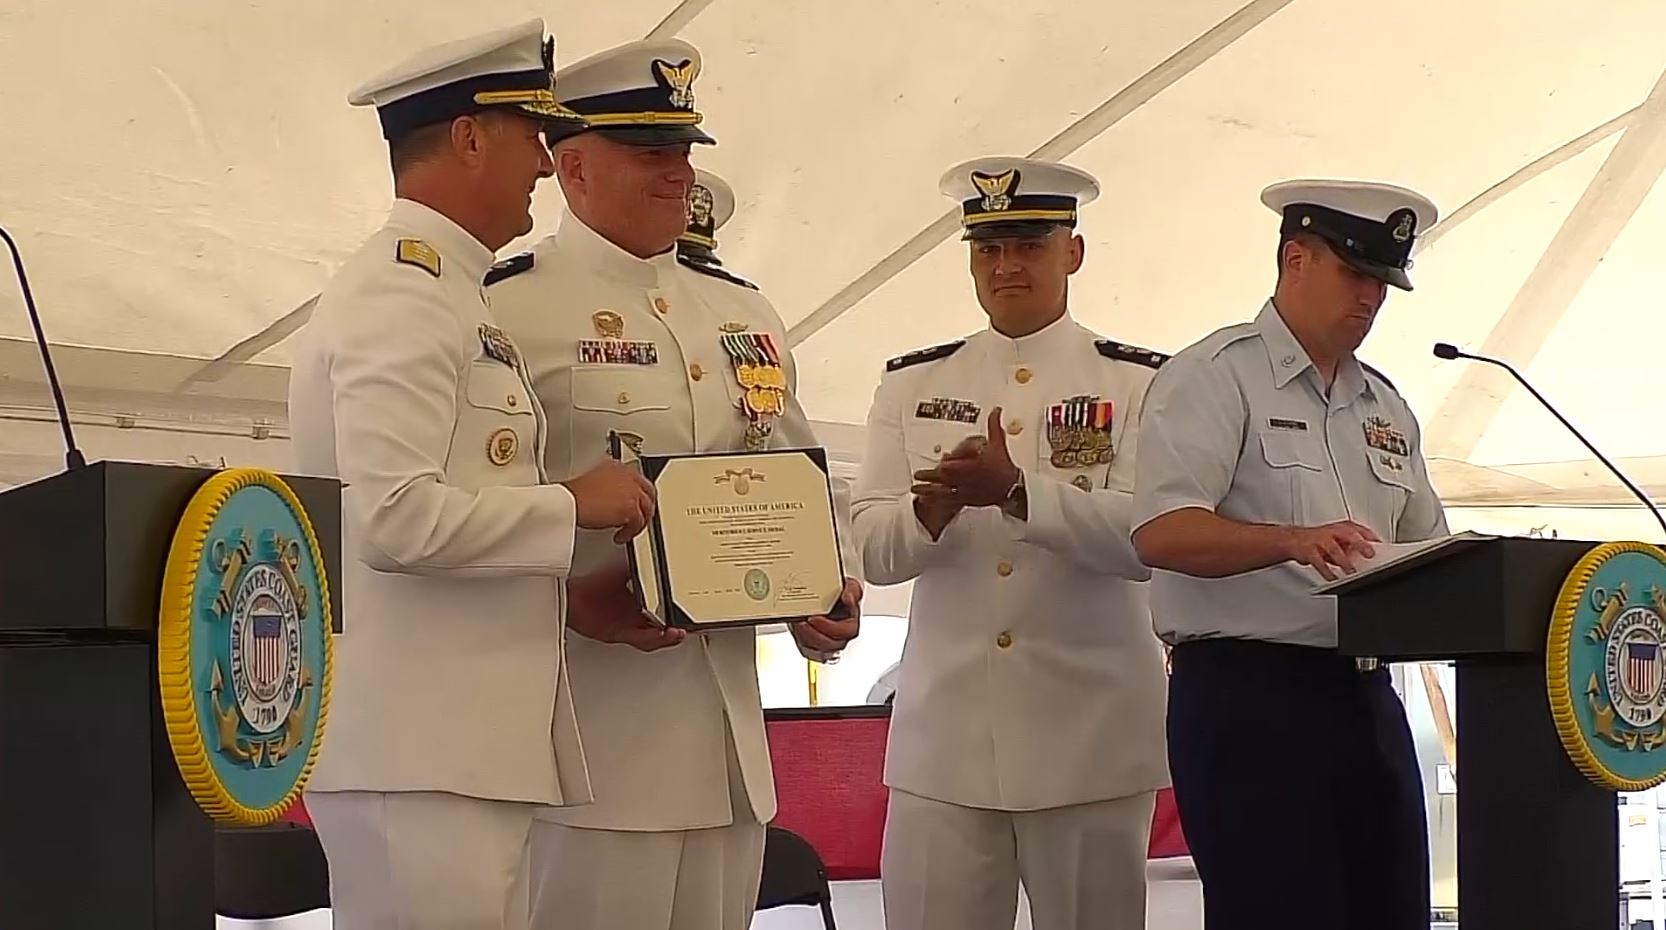 Commander of the U.S. Coast Guard cutter Buckthorn retires with change of command ceremony